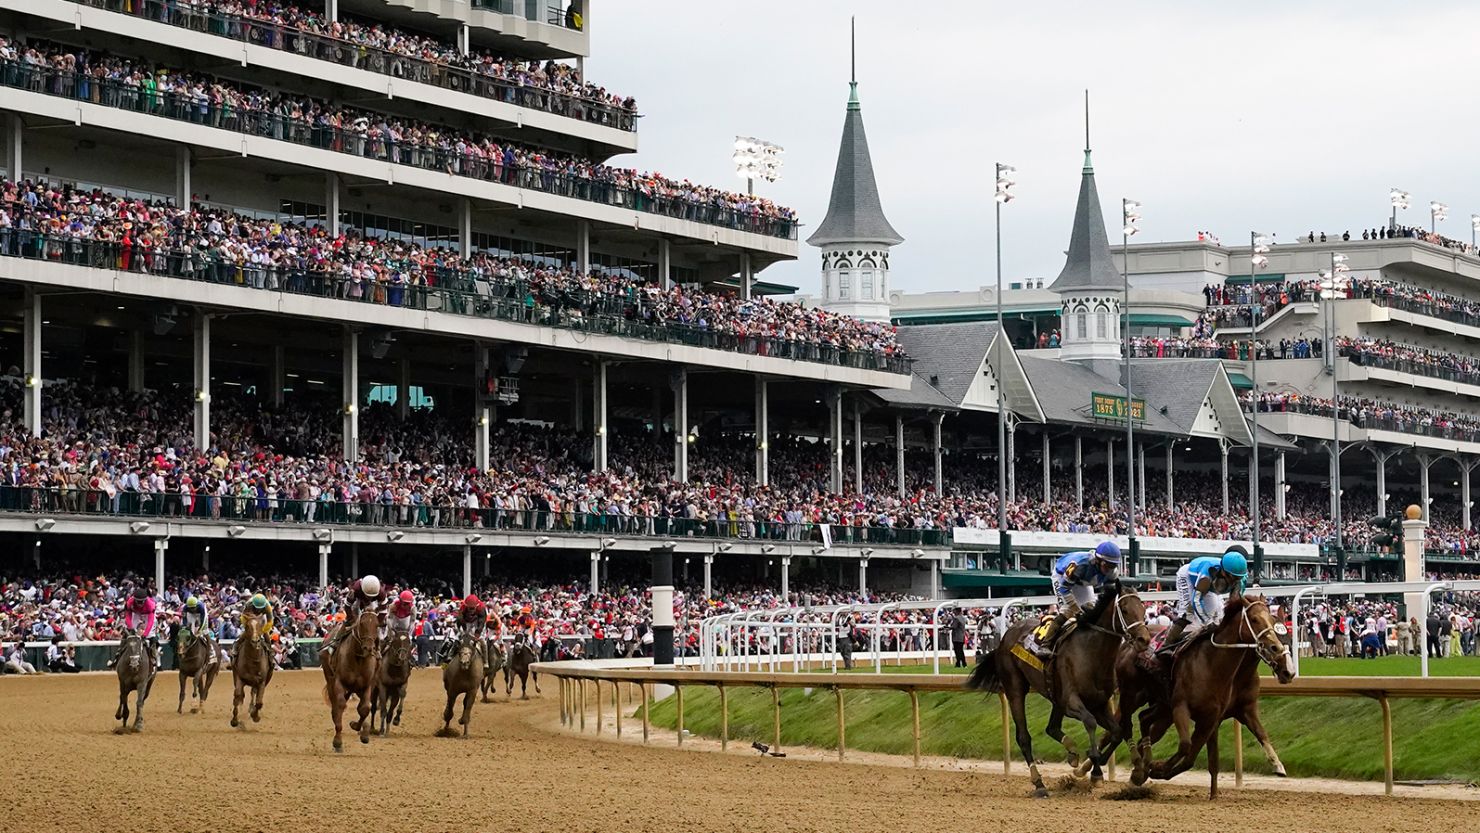 Javier Castellano, right, gallops atop Mage in front of Flavien Prat, atop Angel of Empire, after winning the 149th running of the Kentucky Derby horse race at Churchill Downs Saturday, May 6, in Louisville, Ky. 